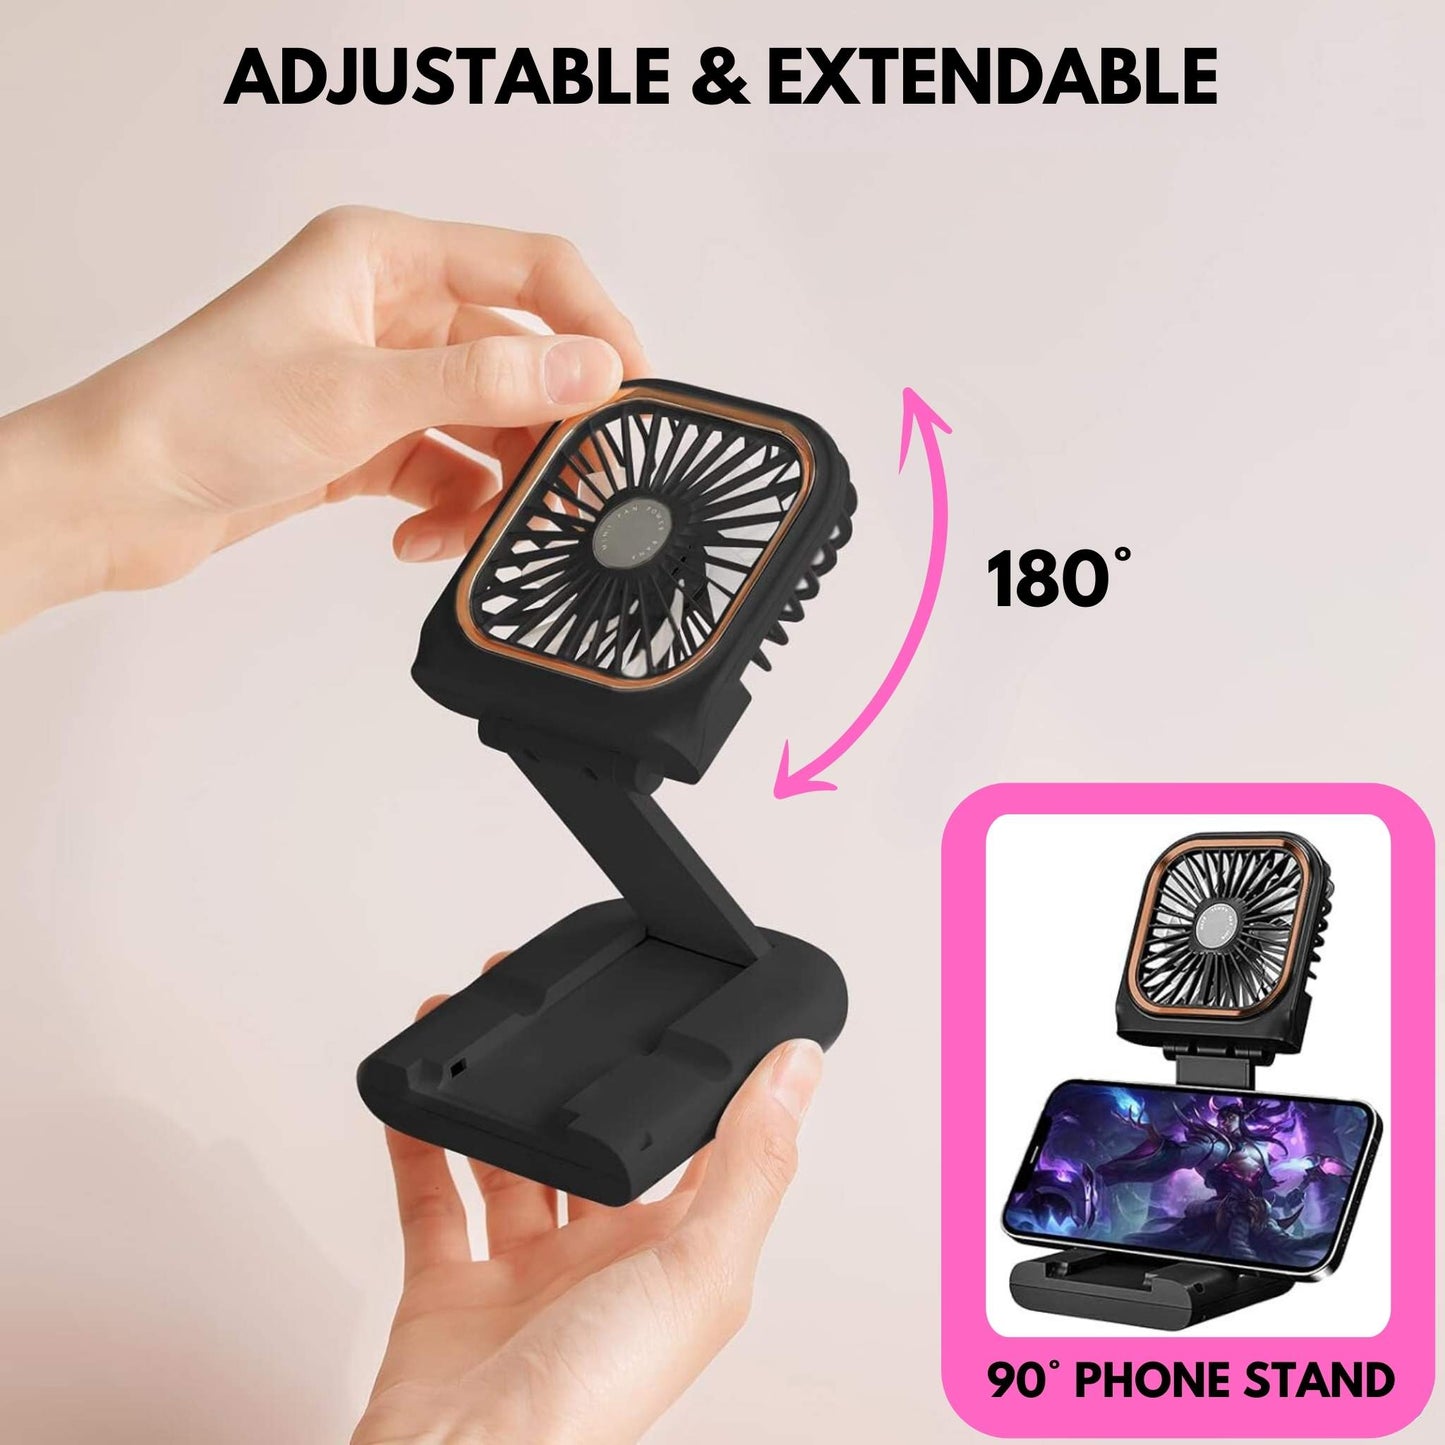 Handheld 180° Foldable Fan With Built In Powerbank